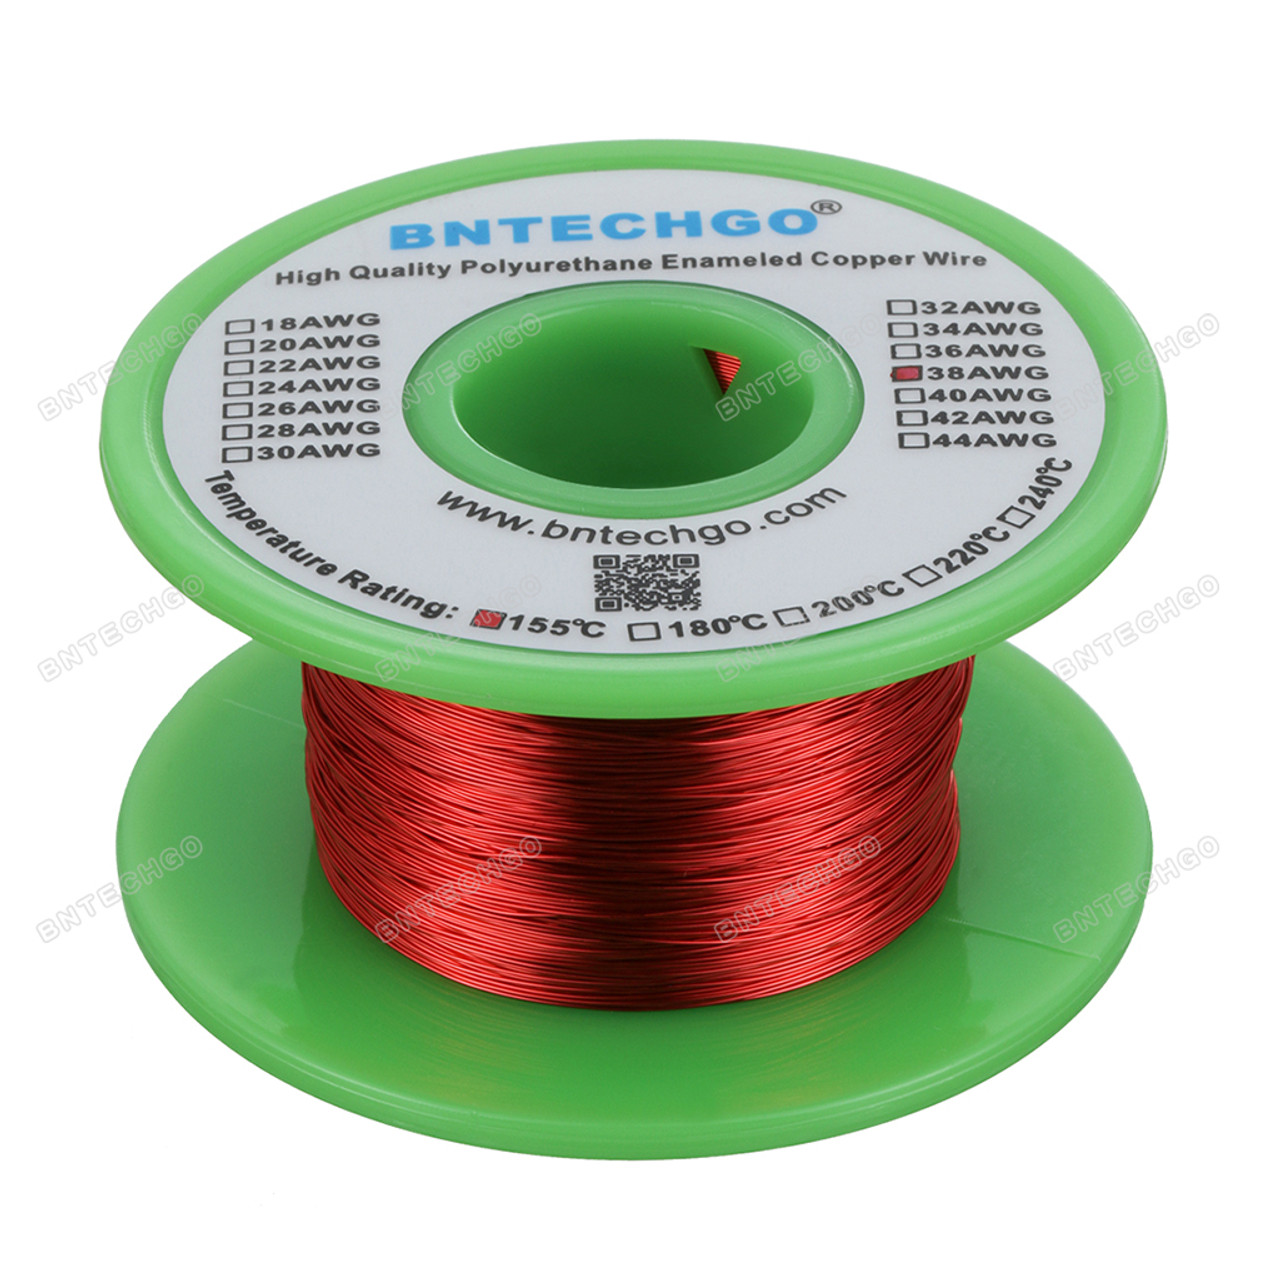 BNTECHGO 28 AWG Magnet Wire - Enameled Copper Wire - Enameled Magnet  Winding Wire - 4 oz - 0.0122 Diameter 1 Spool Coil Red Temperature Rating  155